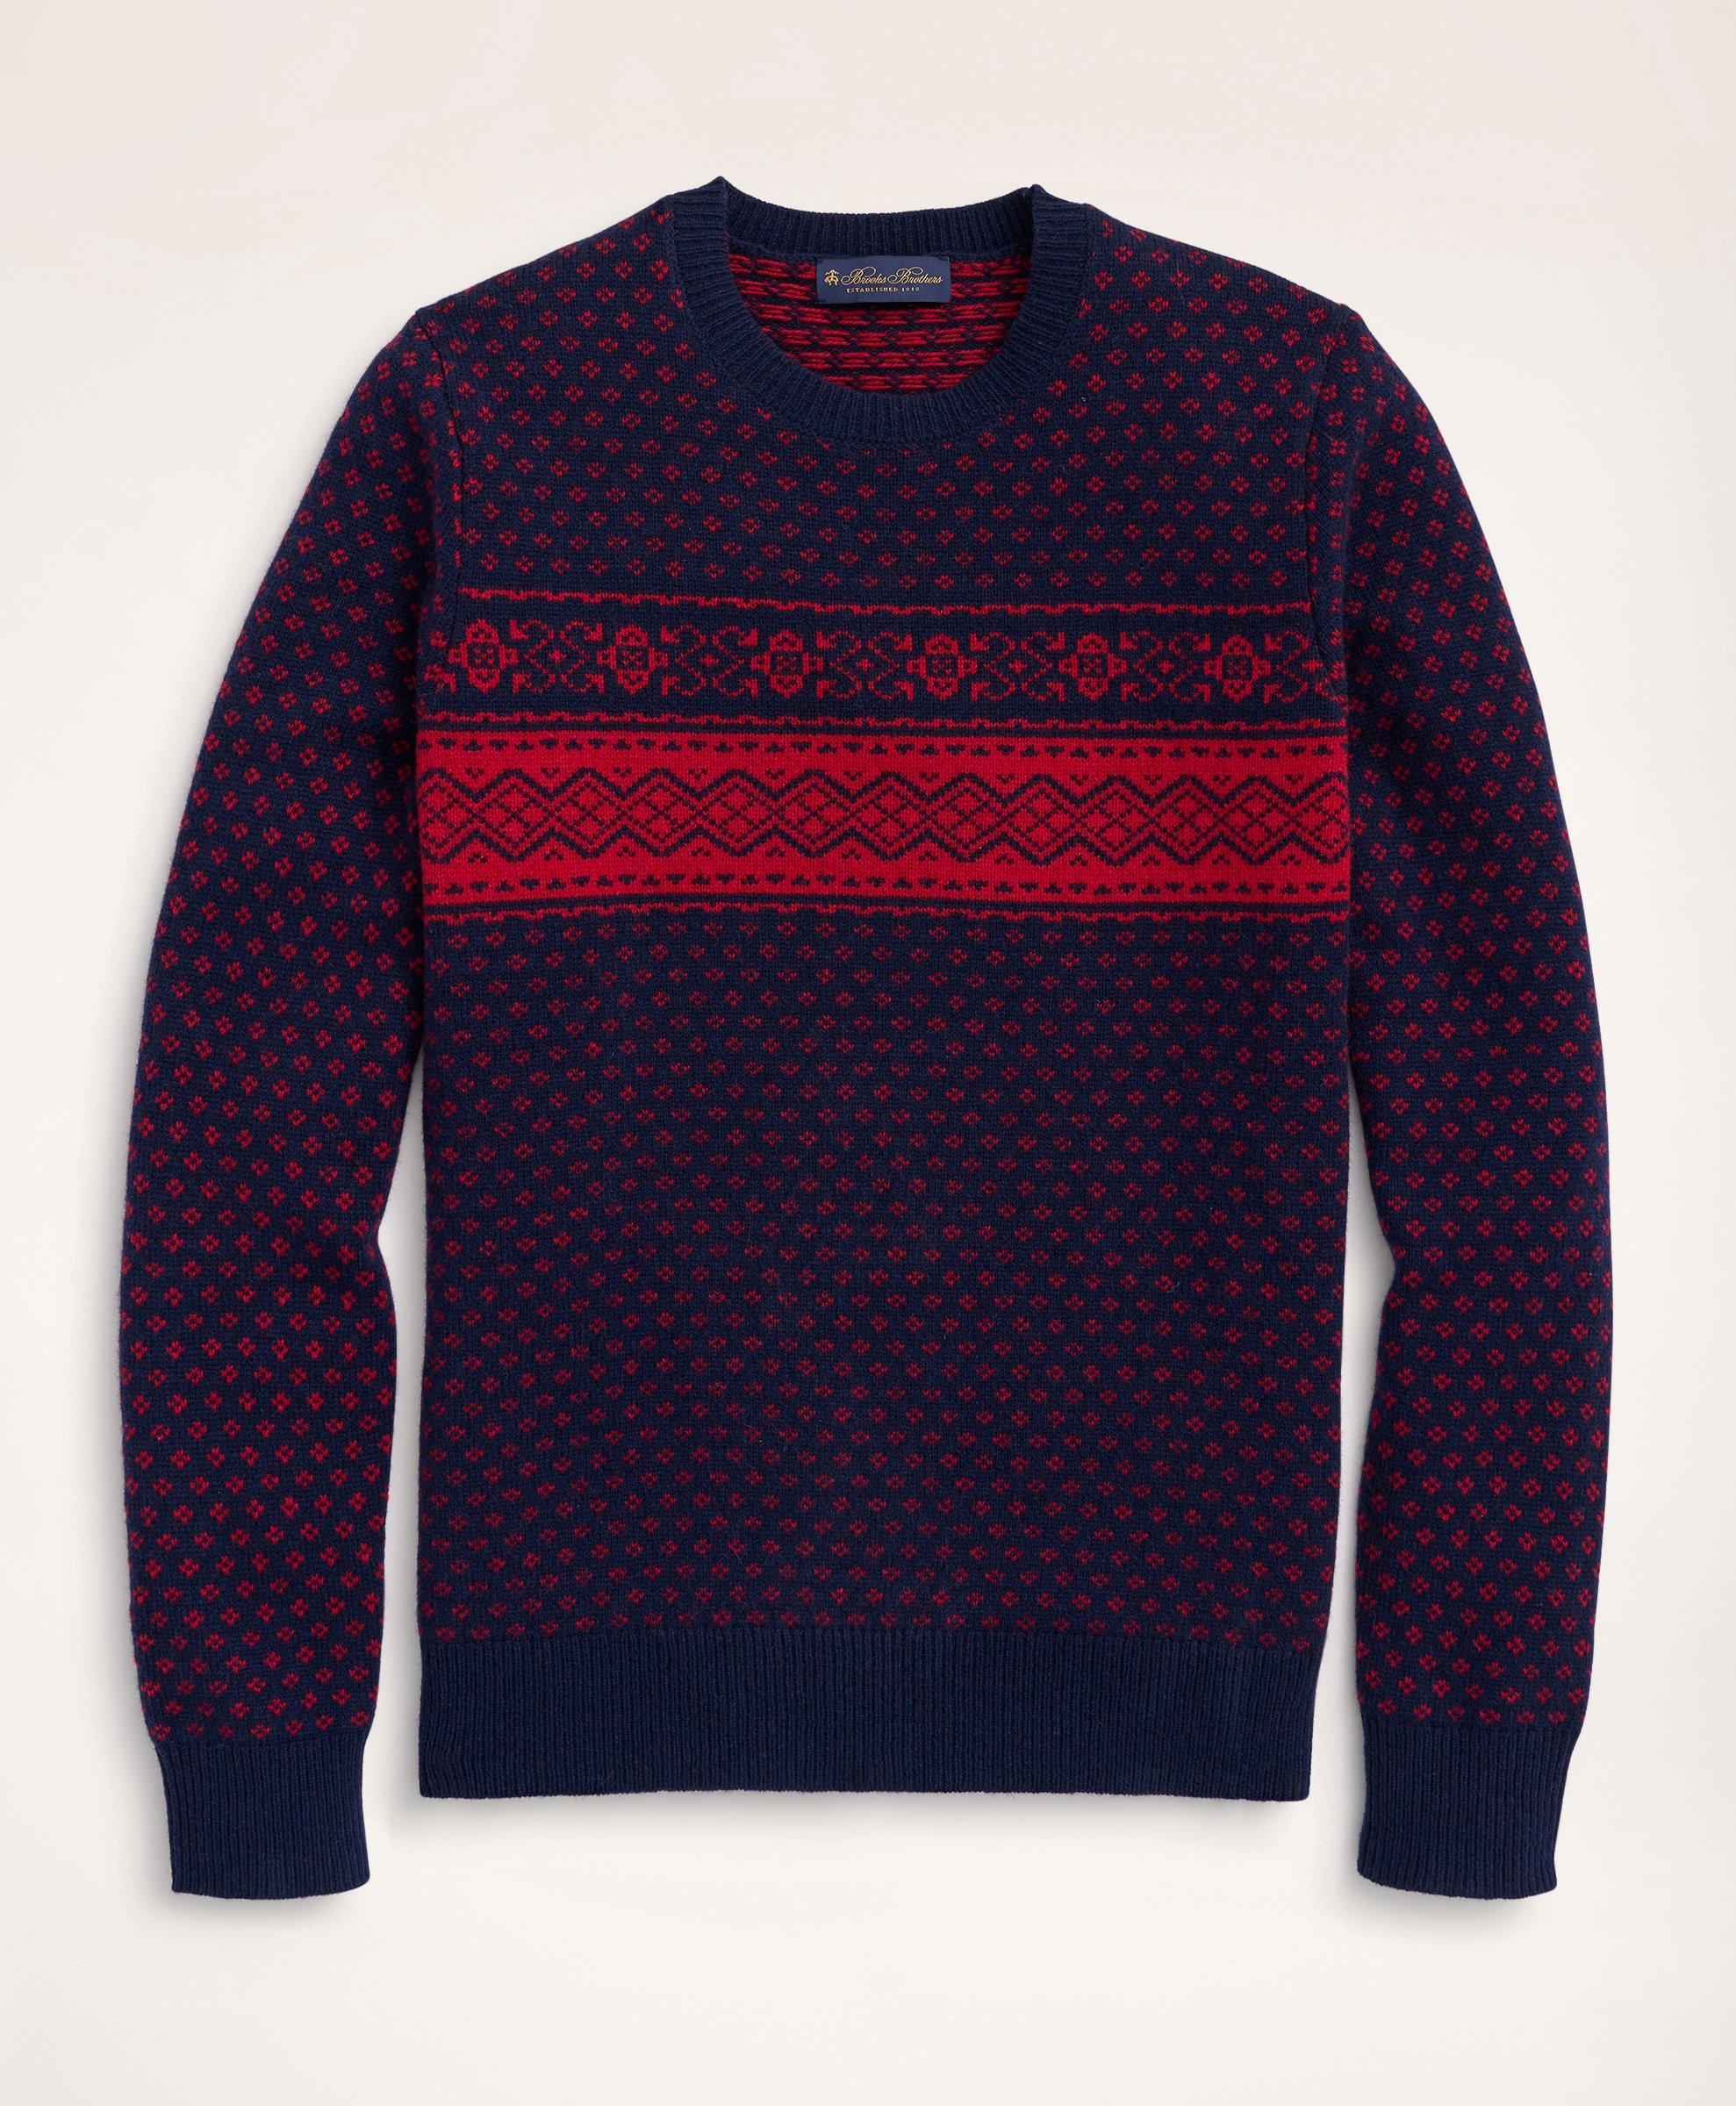 Brooks Brothers Big & Tall Merino Wool Fair Isle Sweater | Navy/red | Size 4x Tall In Navy,red